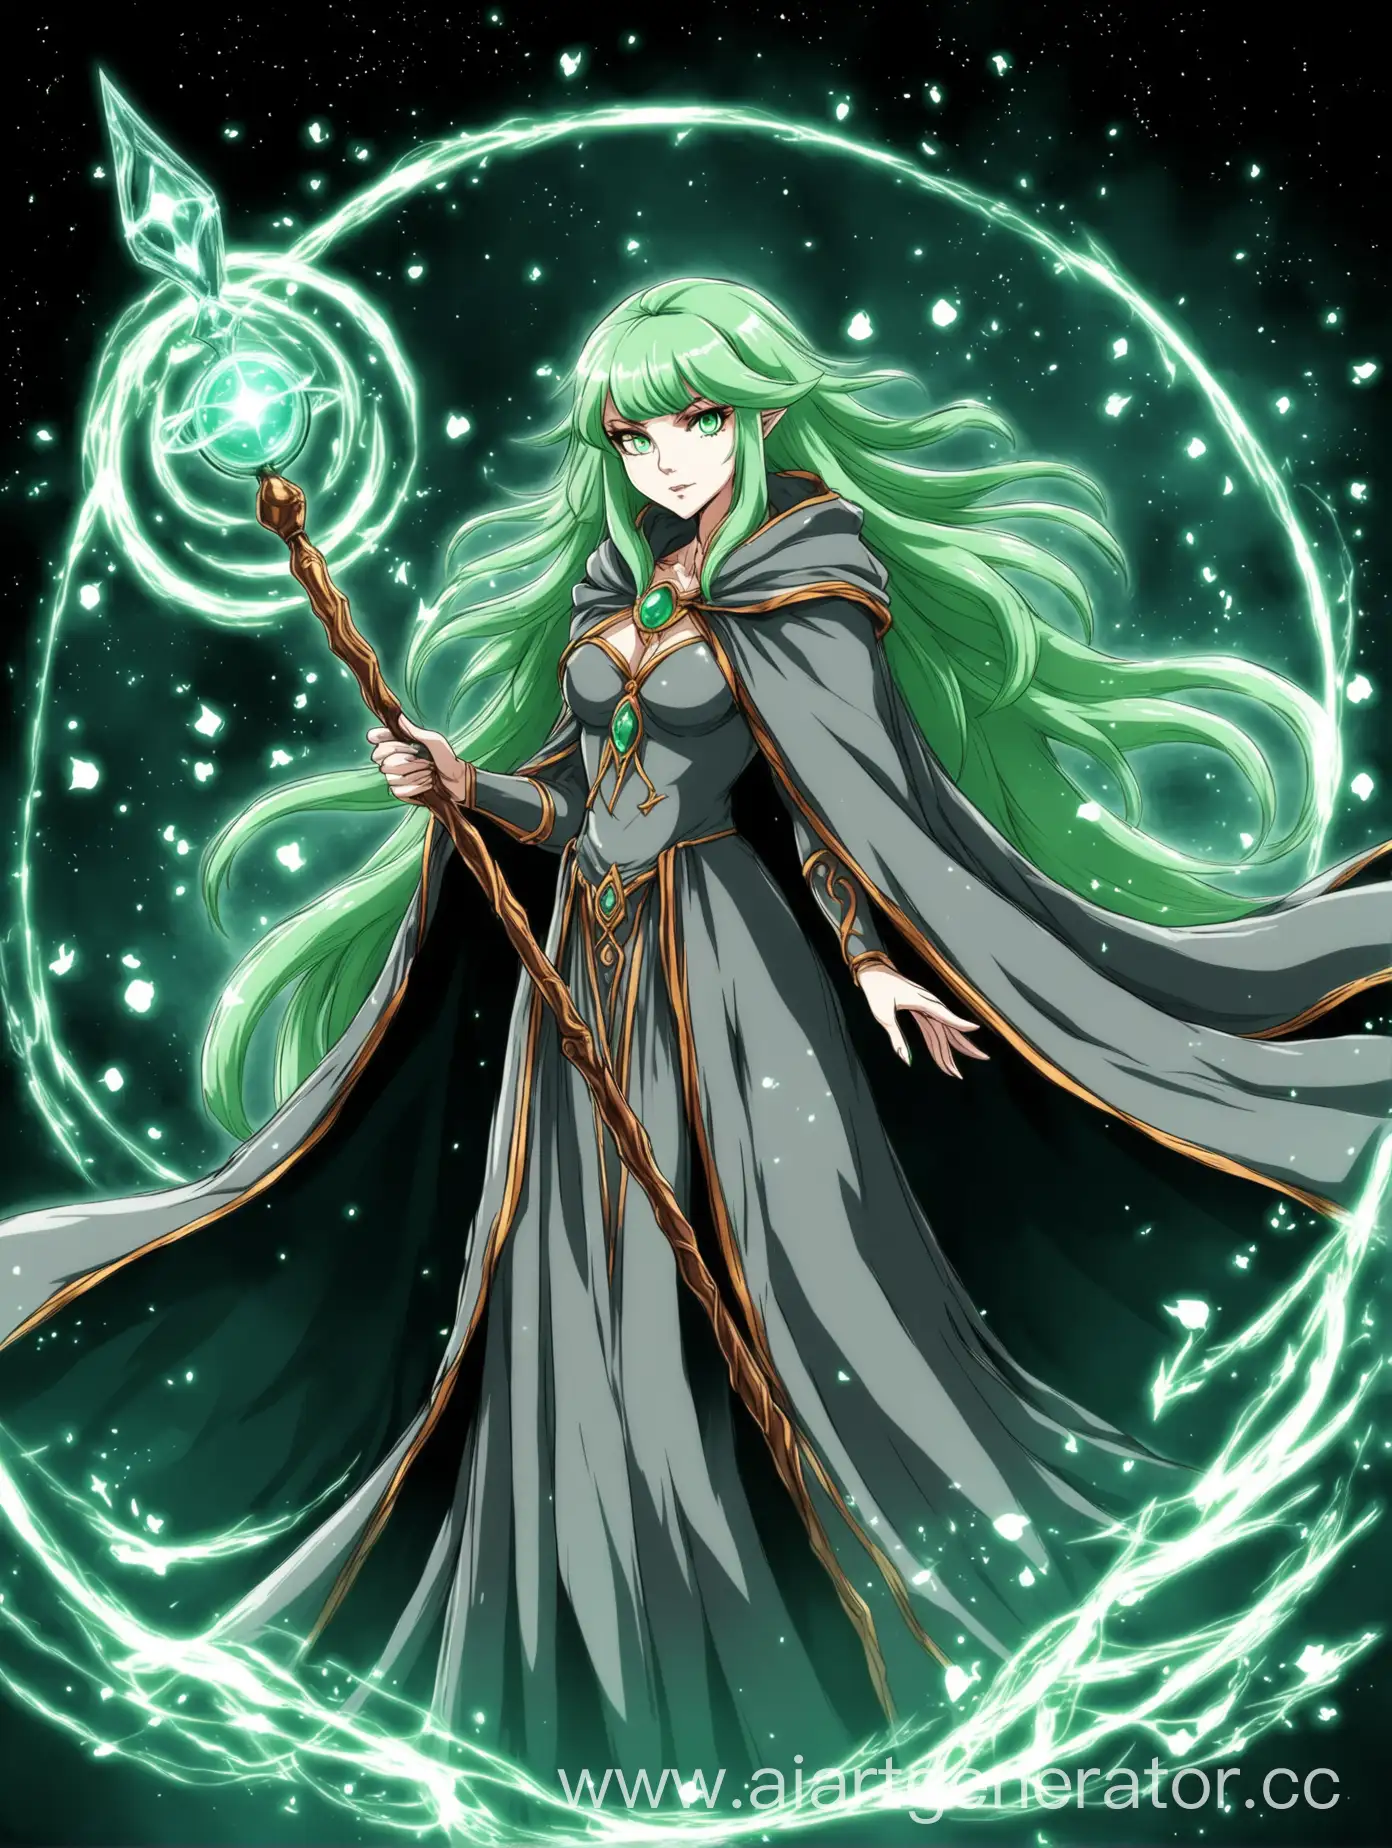 Anime-Sorceress-with-LightGreen-Hair-and-Gray-Cloak-Holding-Magical-Staff